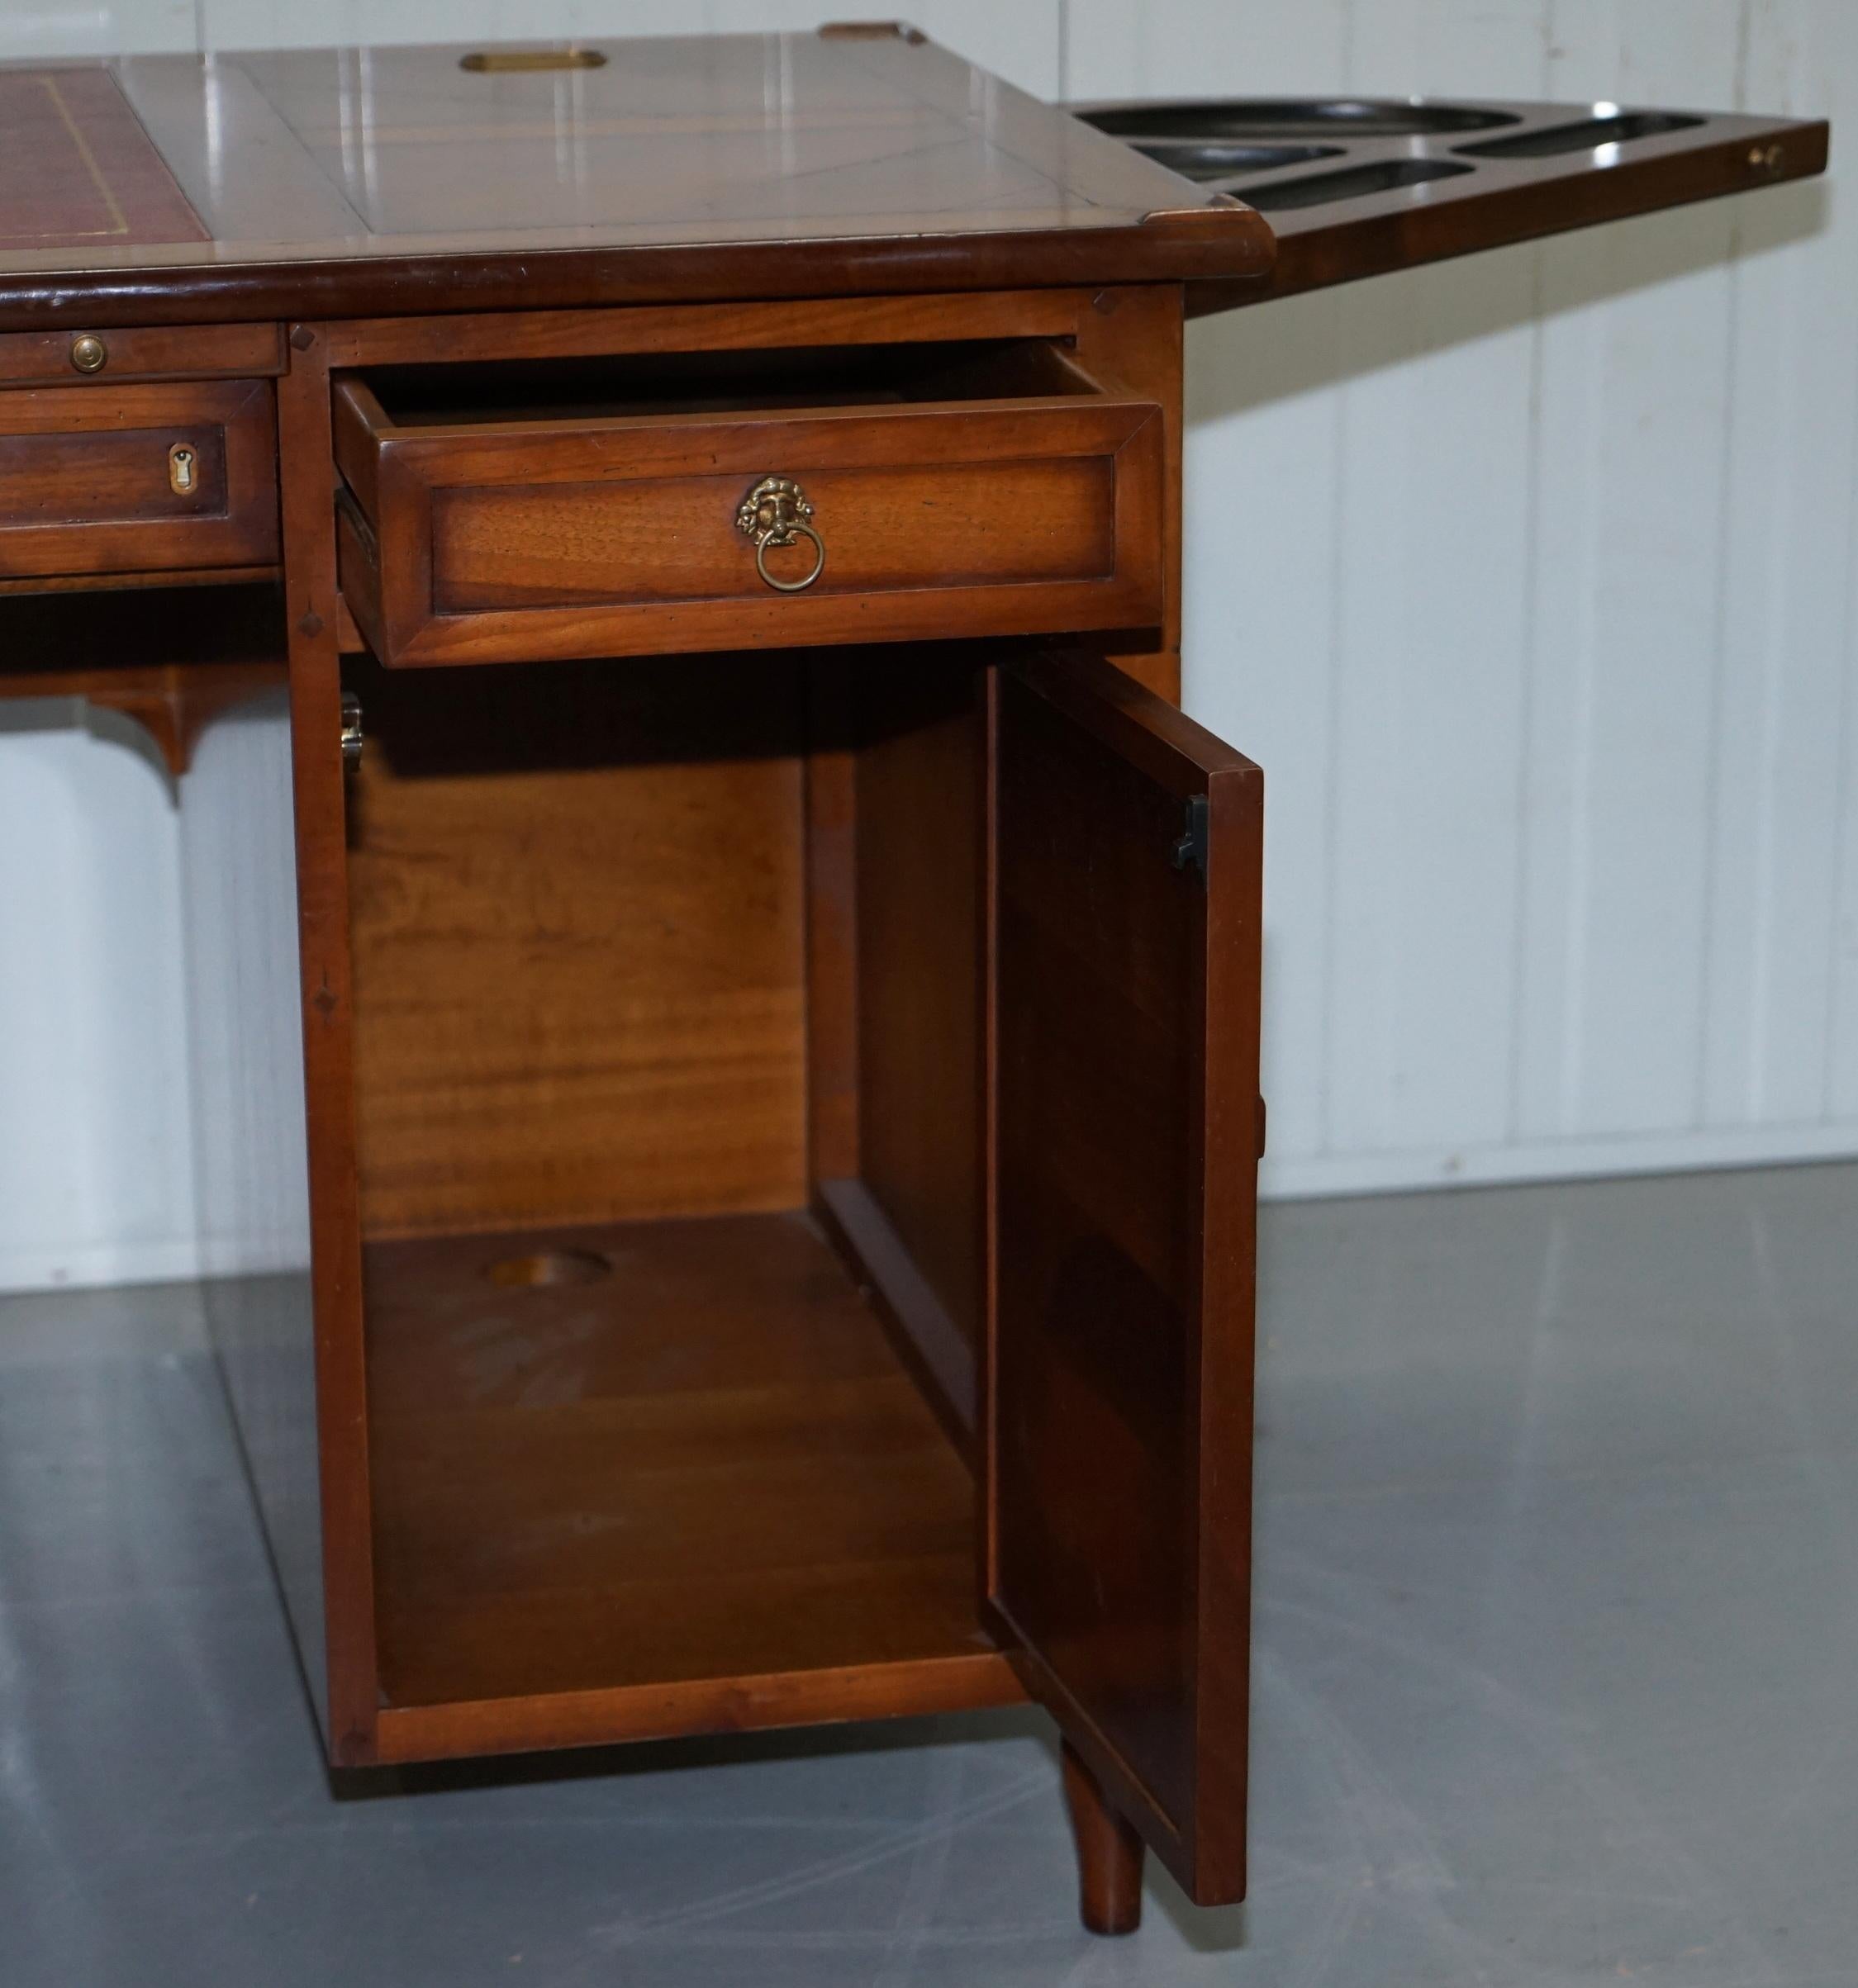 ASSI D'ASOLO ITALY CHERRY WOOD LEATHER DESK DESIGNED To HOUSE COMPUTER 9